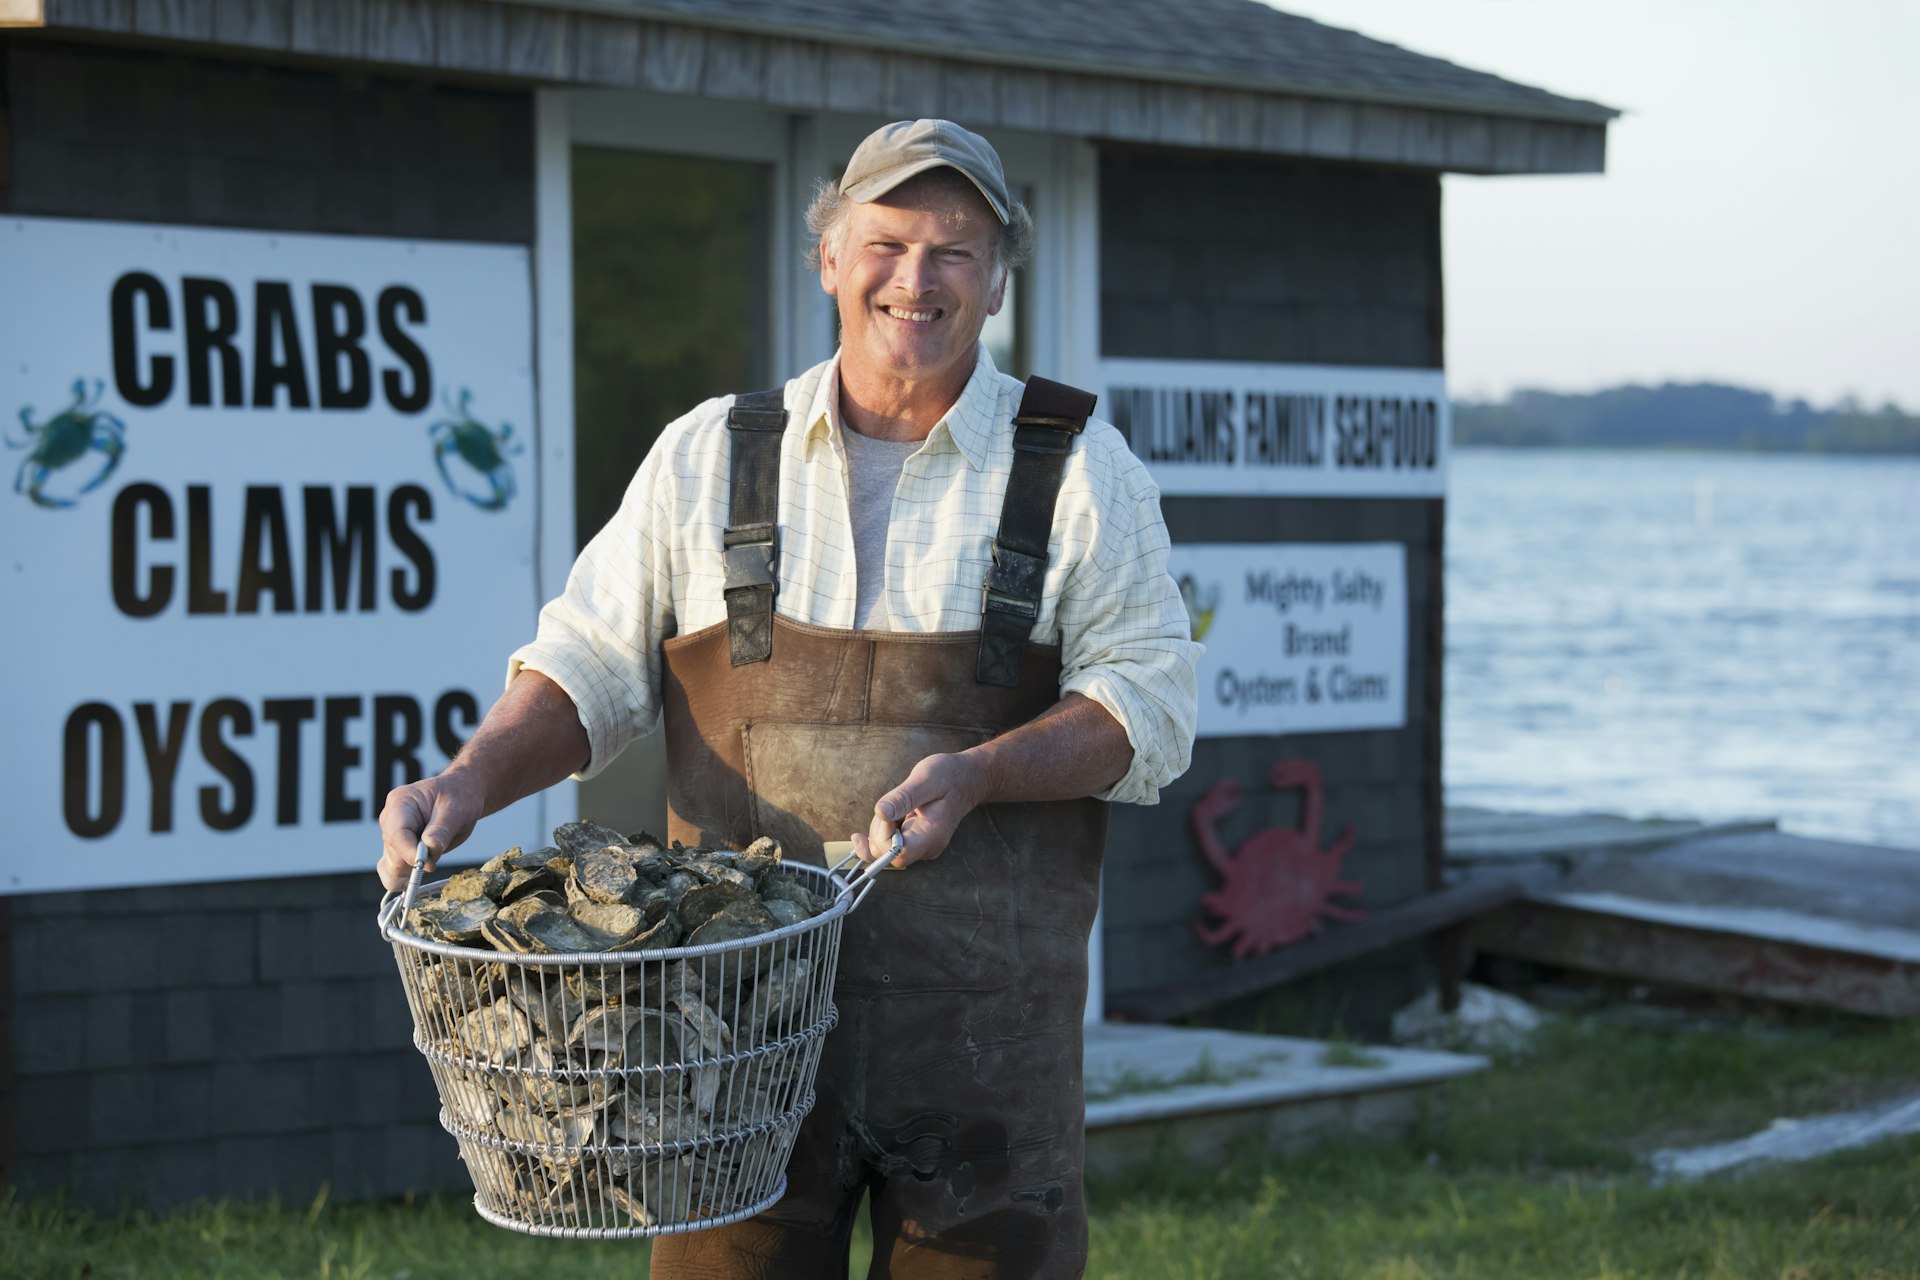 An oyster fisherman holds a basket of oysters outside his seafood store in the Northern Neck peninsula of Virginia